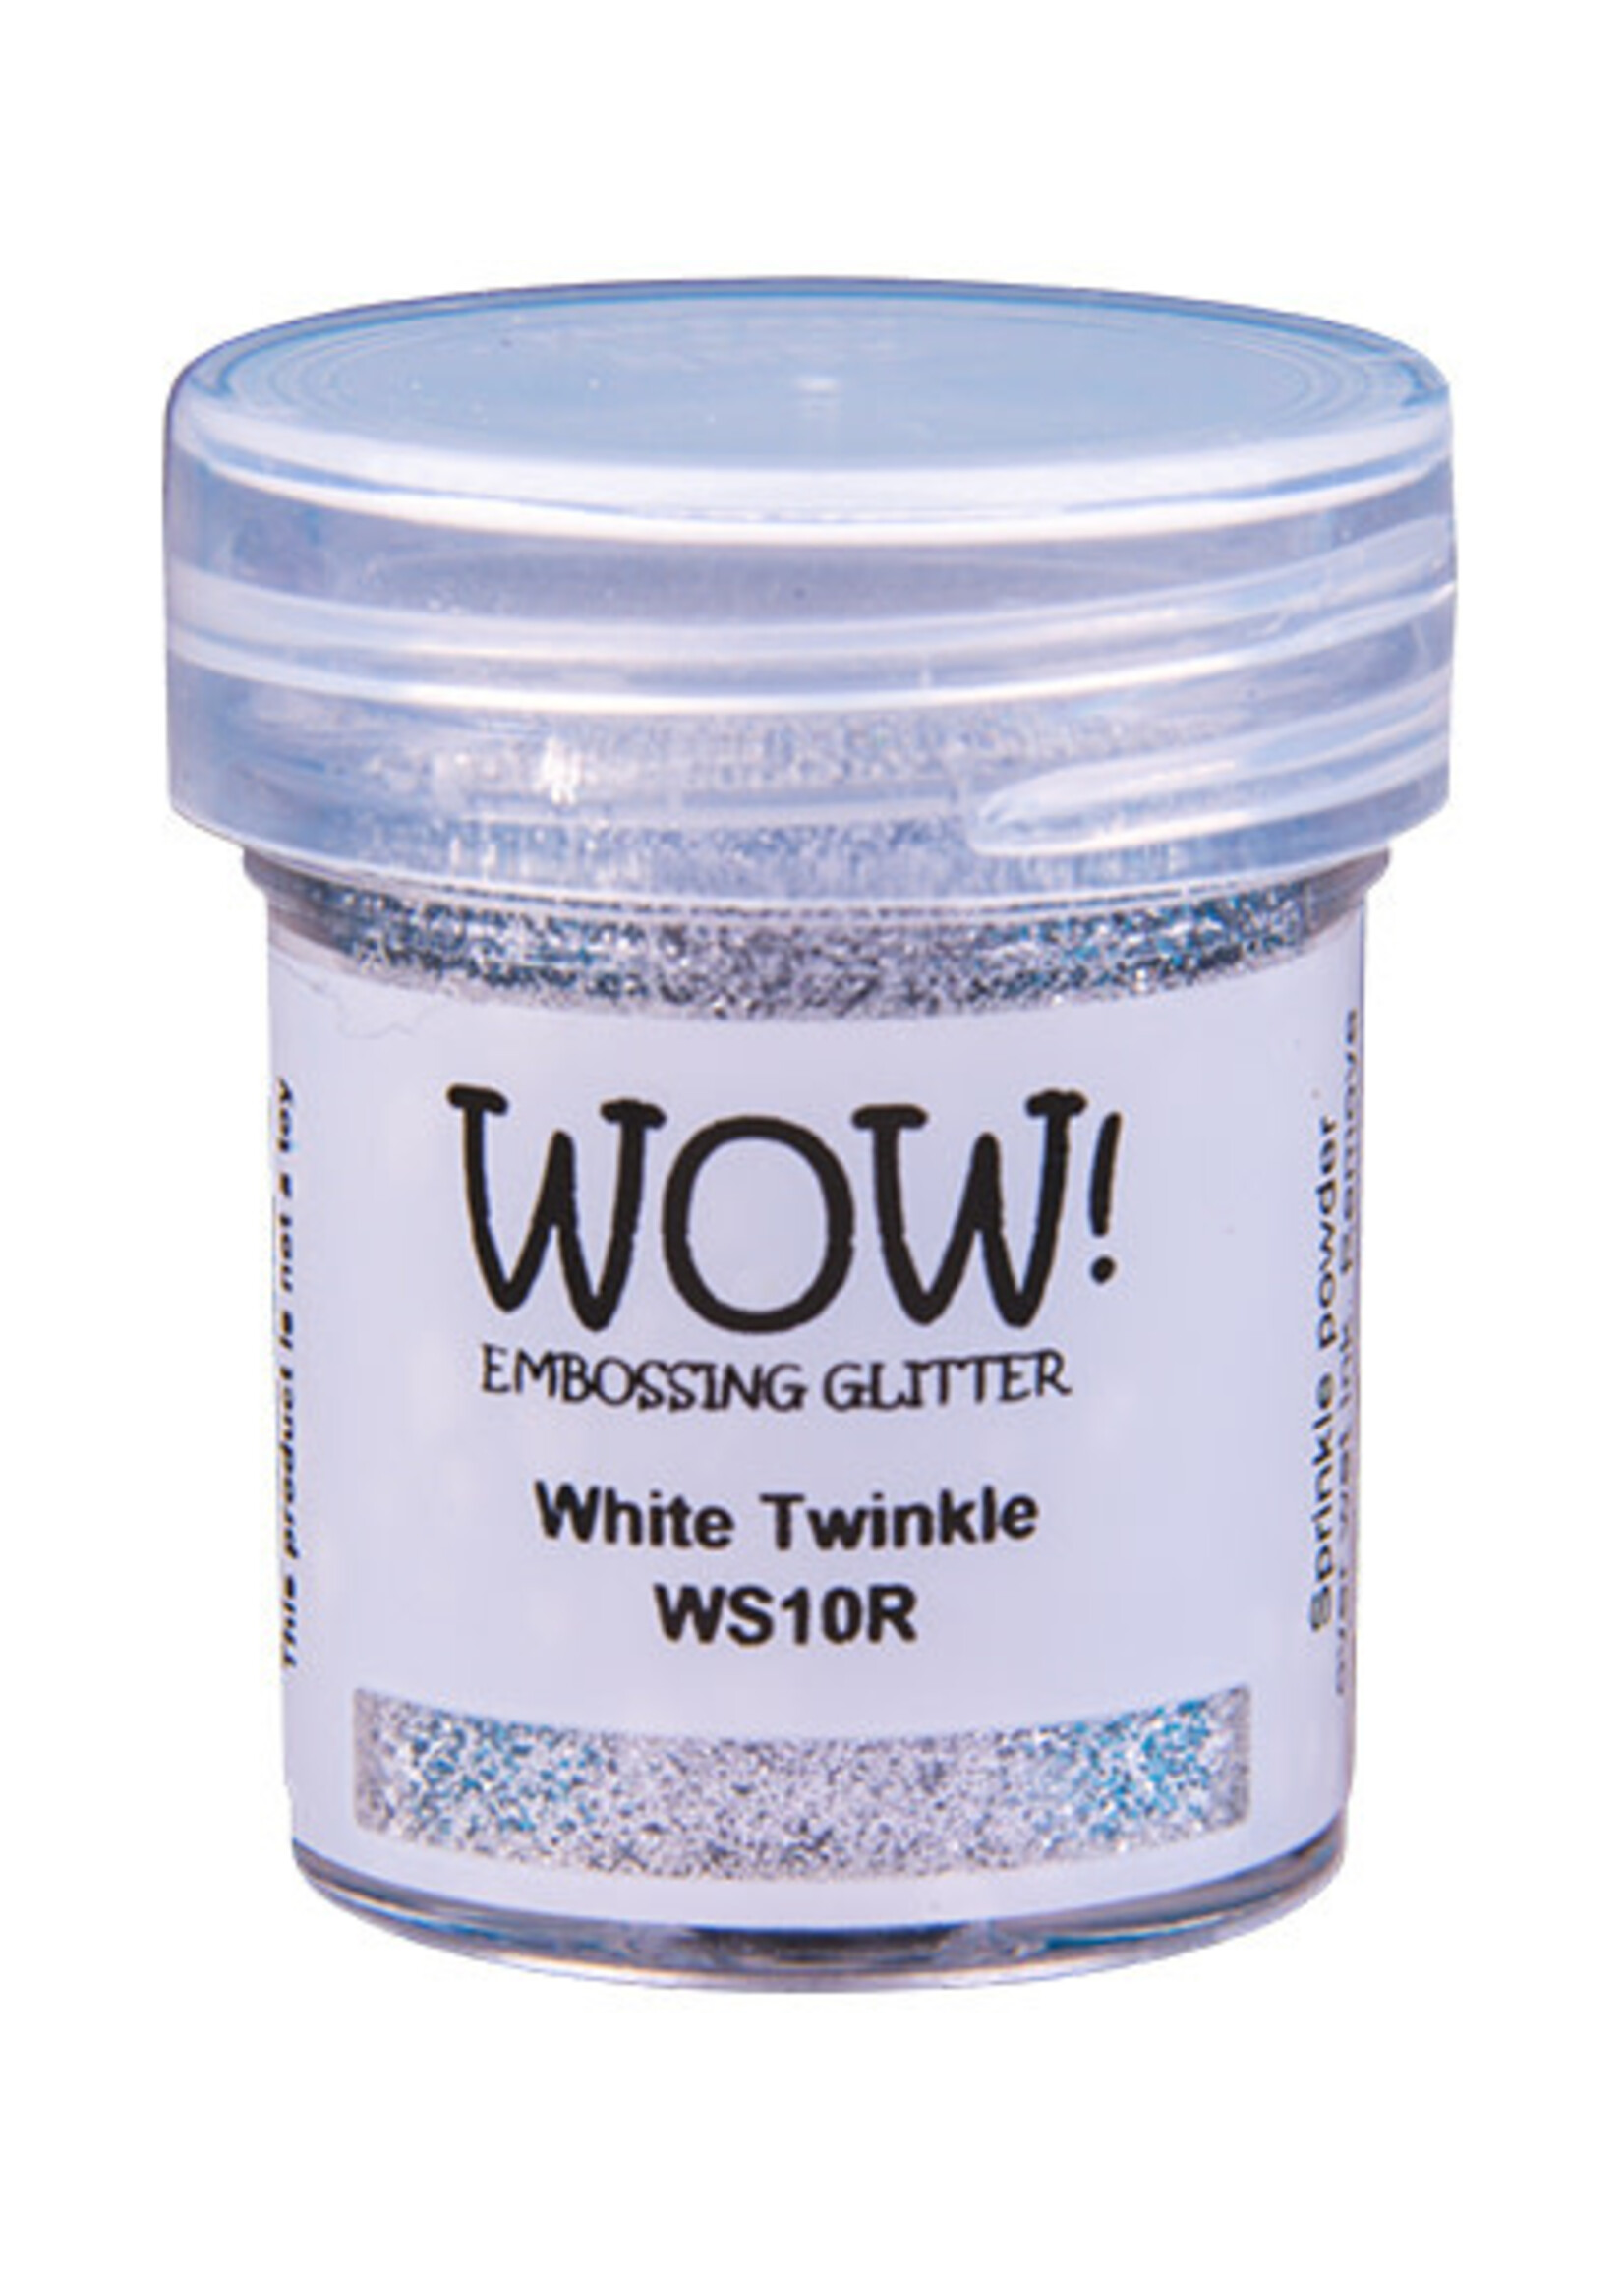 Wow! WS10R - White Twinkle